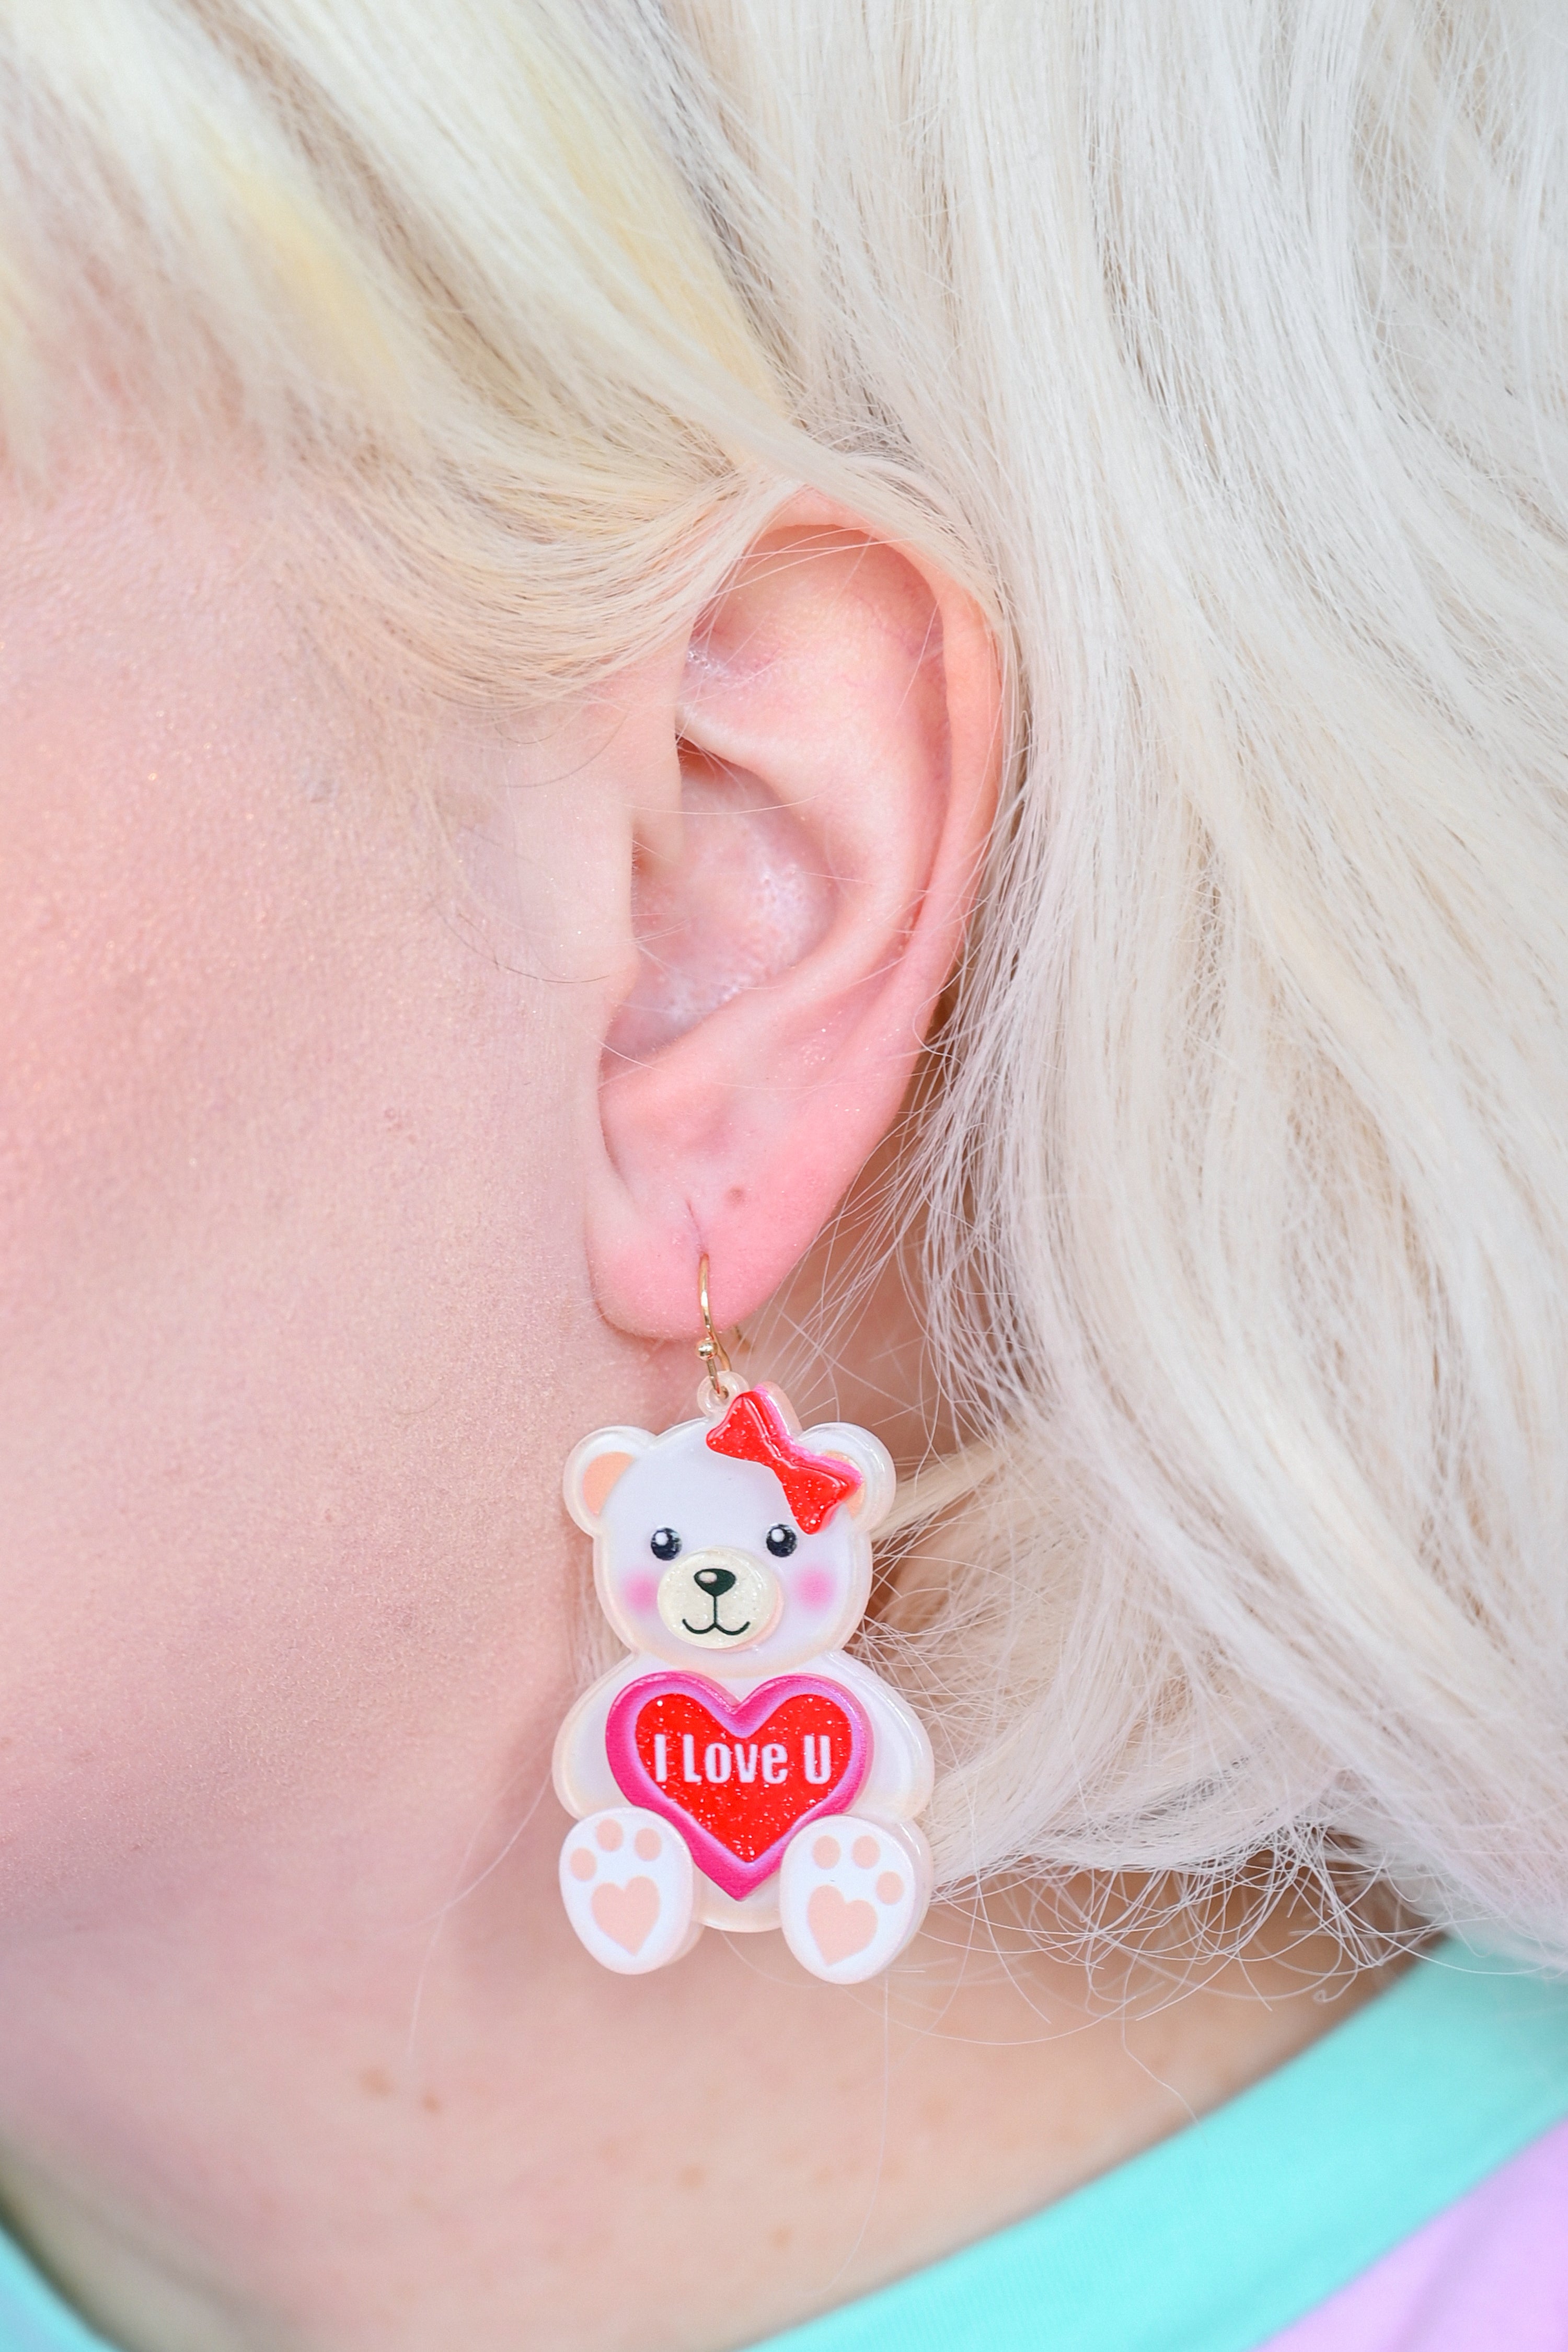 White teddy bear earrings with a red bow holding a heart that says "I love U"